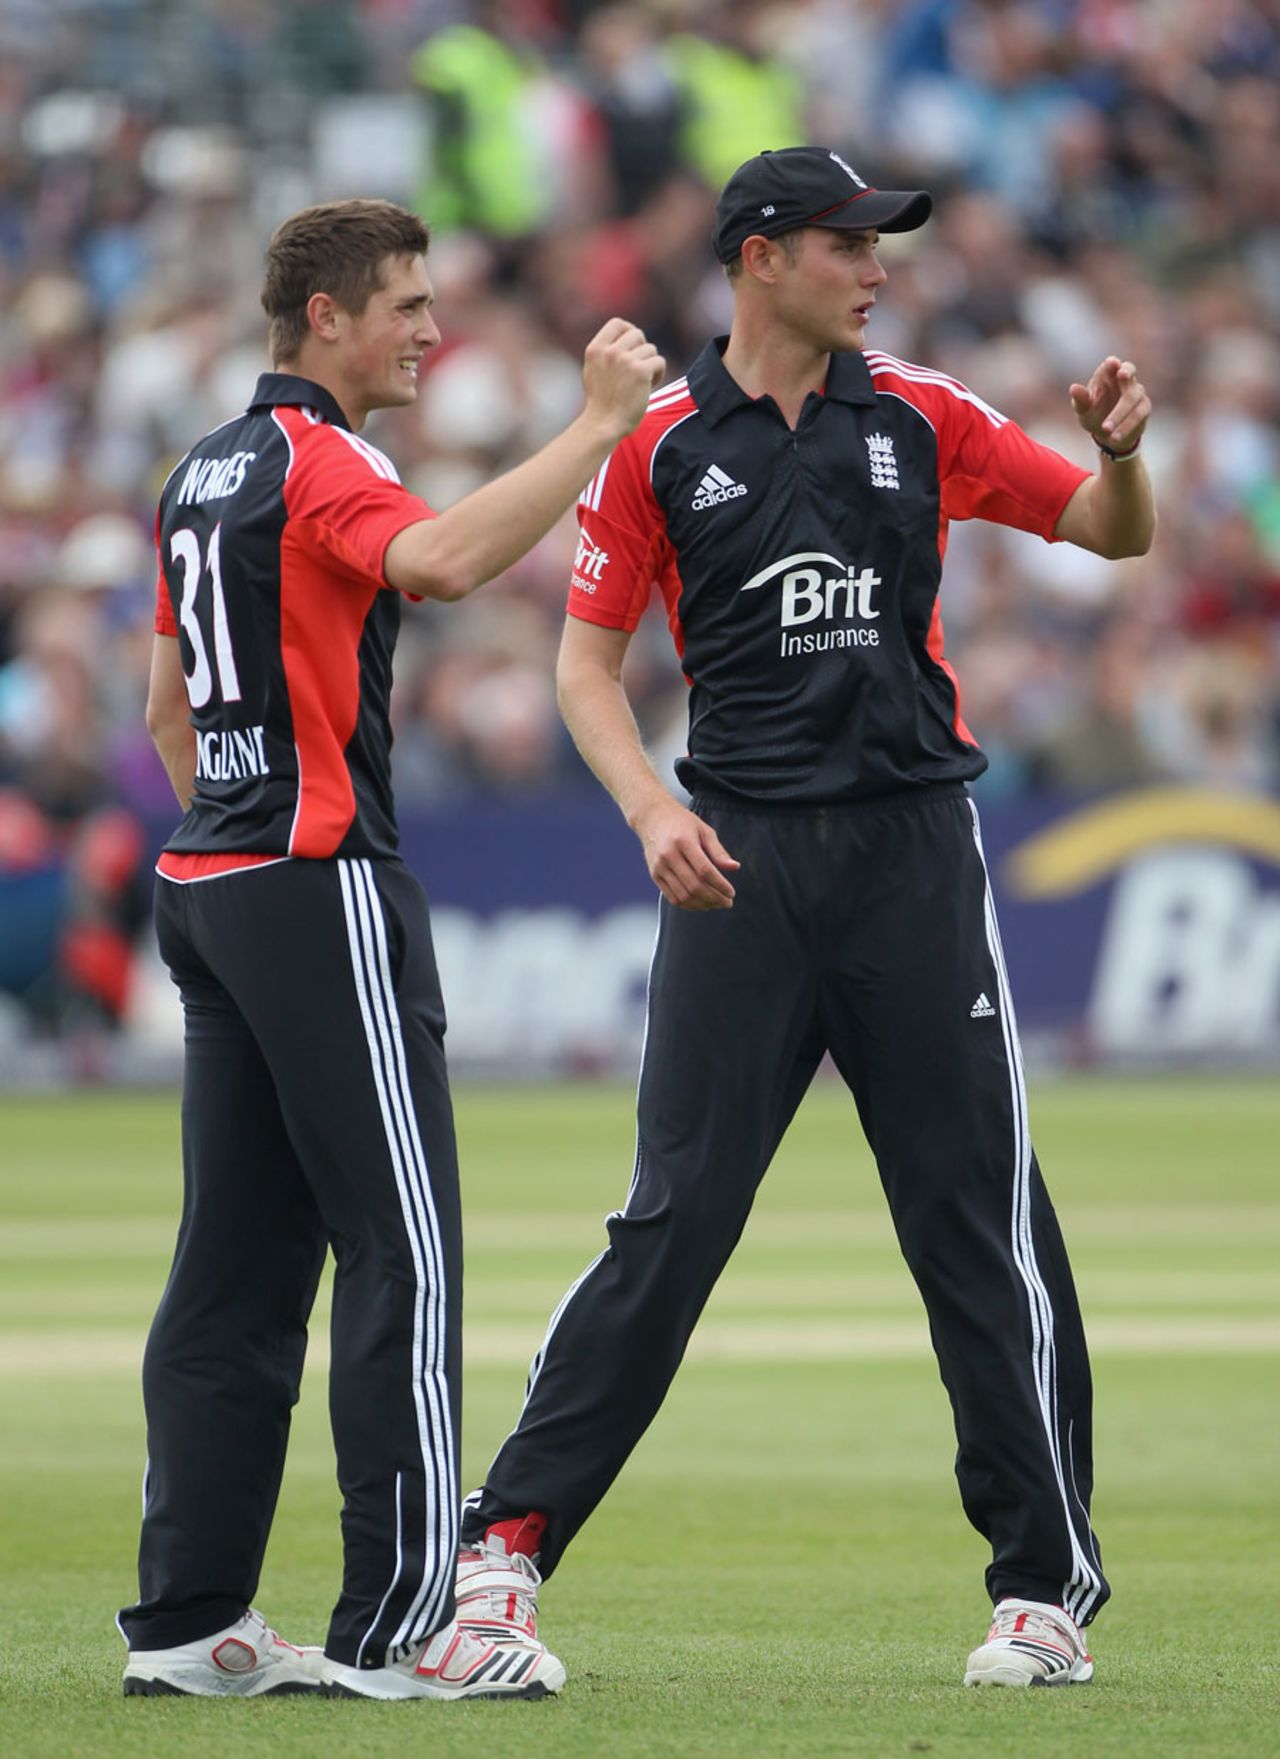 Stuart Broad and Chris Woakes had tough days in their respective roles, England v Sri Lanka, only Twenty20, Bristol, June 25, 2011